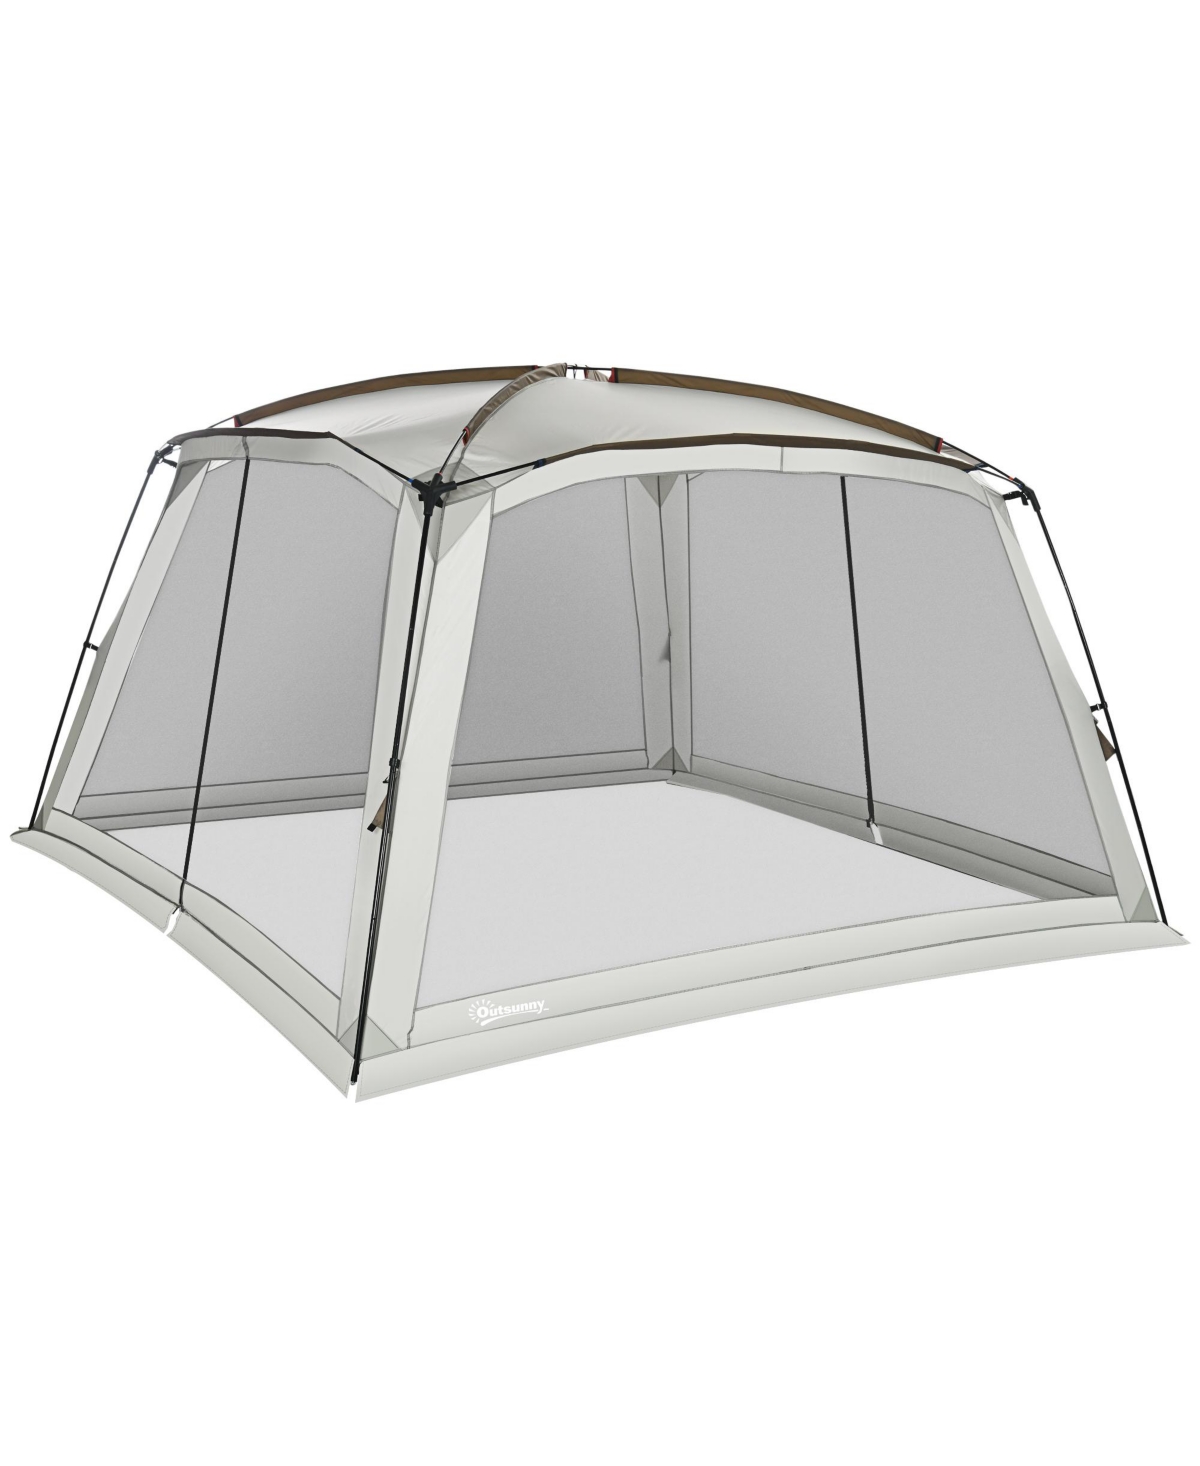 141.75" x 141.75" Screen House Room, UV50+ Screen Tent with 2 Doors and Carry Bag, Easy Setup, for Patios Outdoor Camping Activities - White